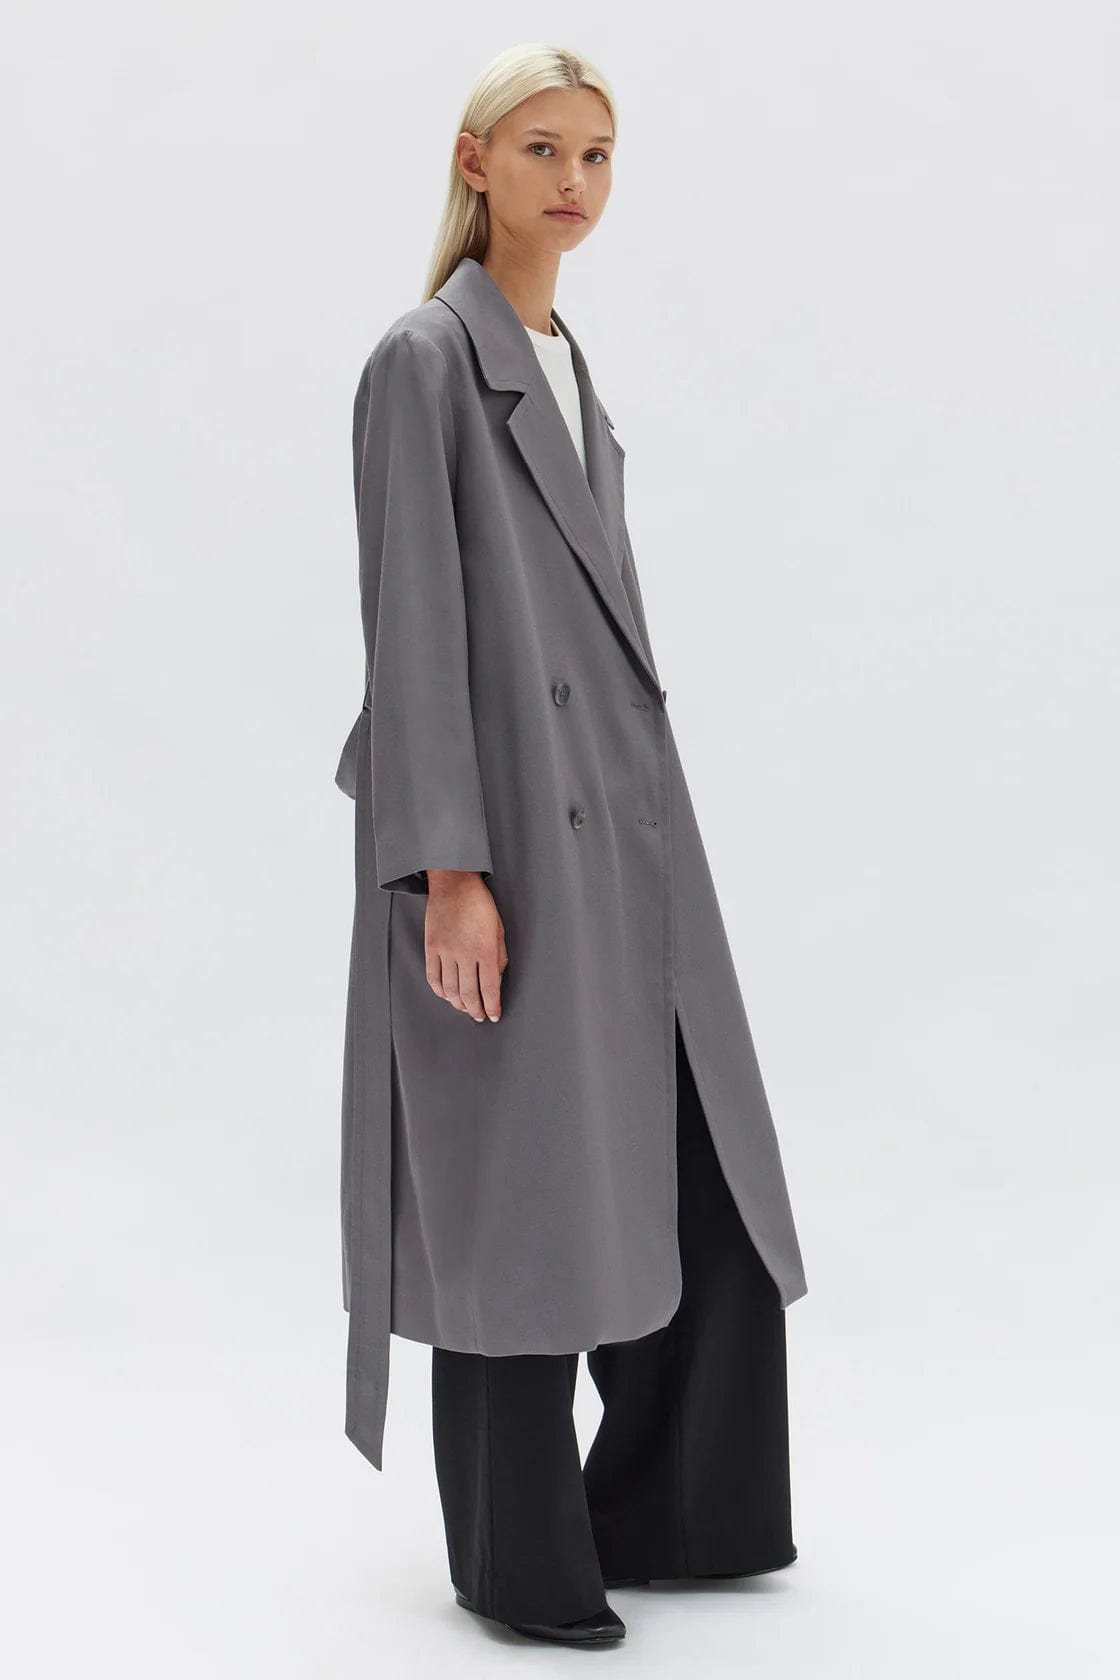 Assembly Label Coats - Trench Assembly Label | Kirby Twill Trench - Dark Ash